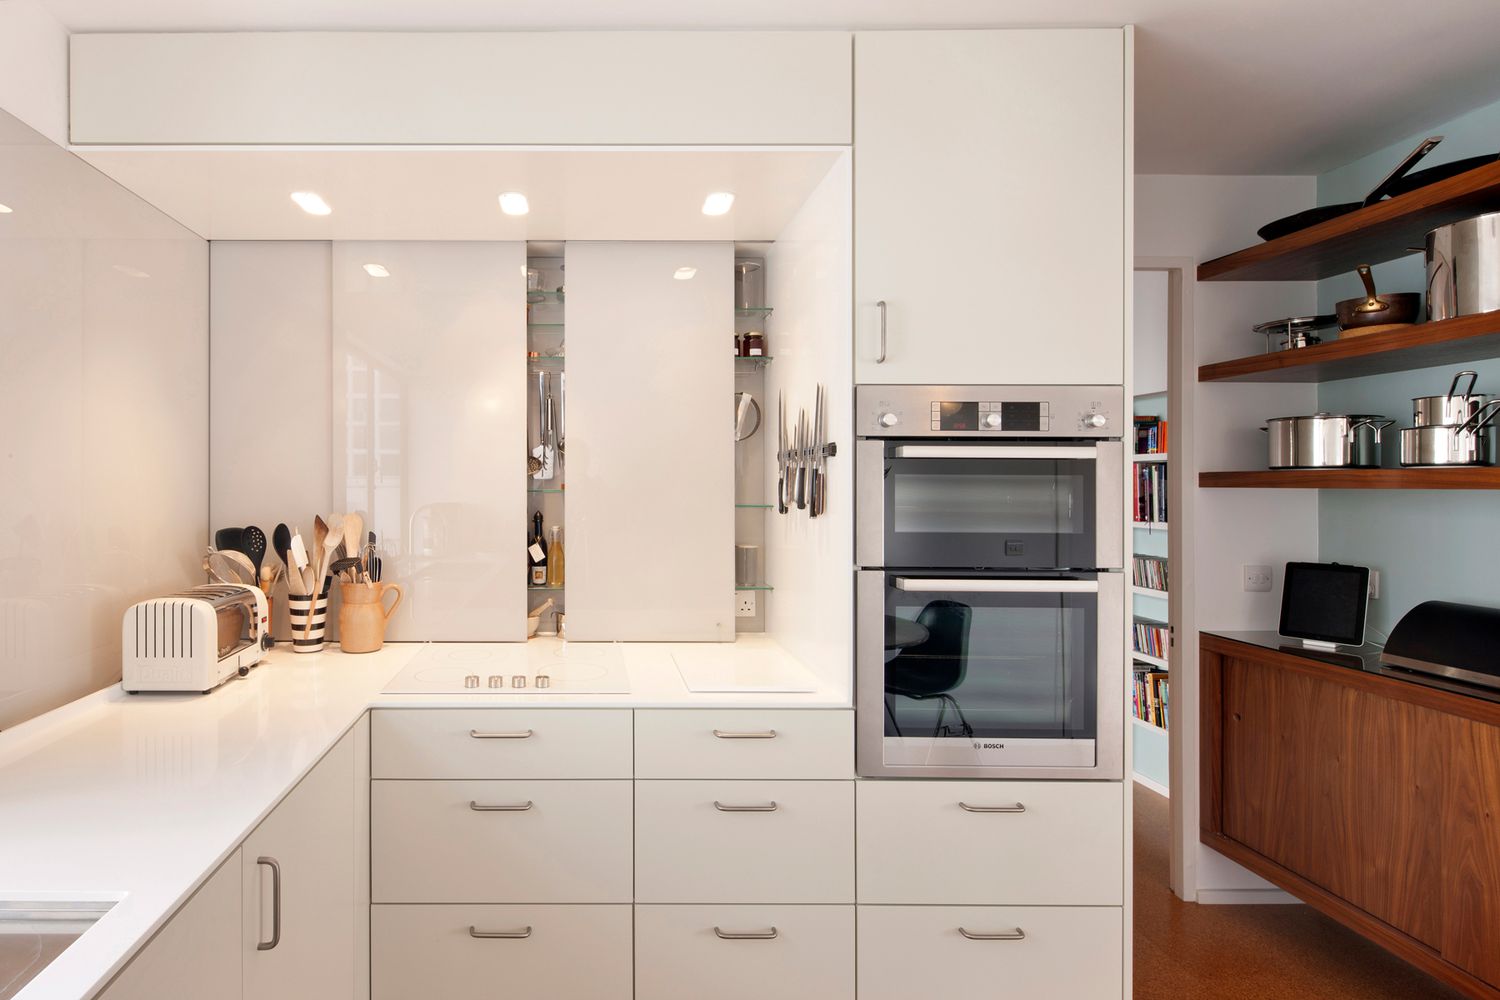 Appliance Garage Cabinets Are Back With A Sophisticated Twist Real Simple